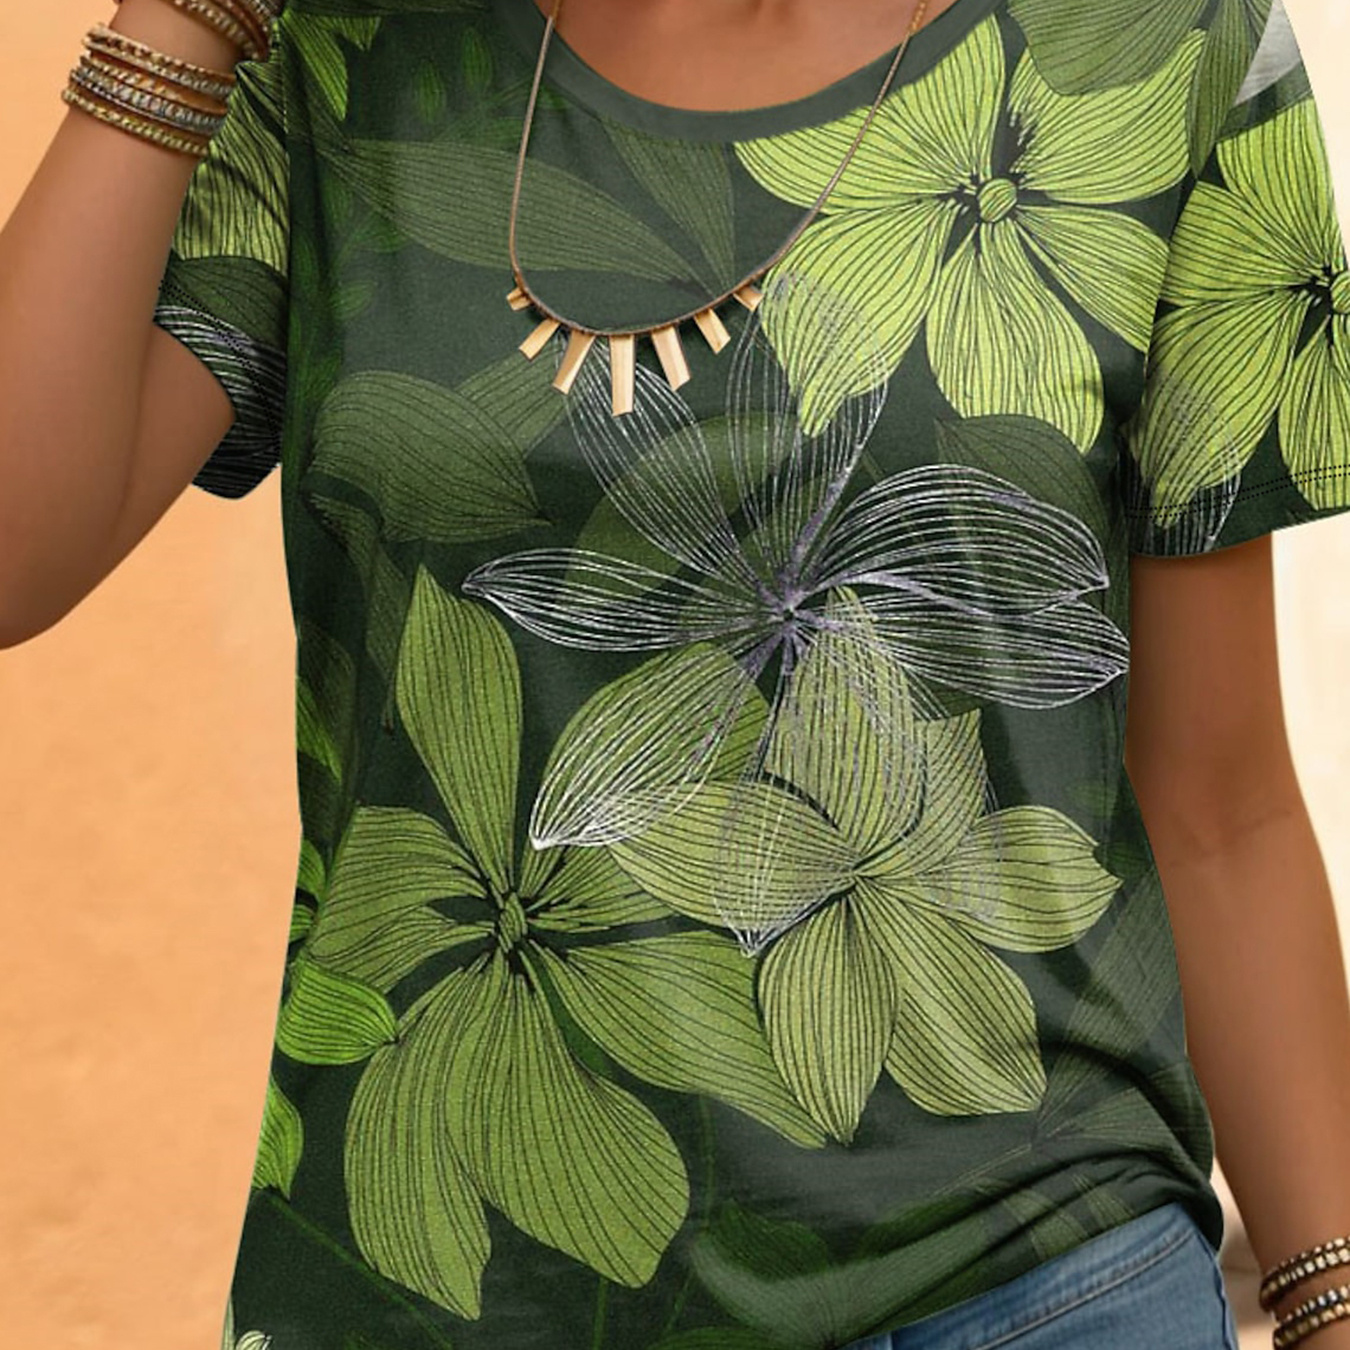 

Leaf Print T-shirt, Casual Crew Neck Short Sleeve Top For Spring & Summer, Women's Clothing